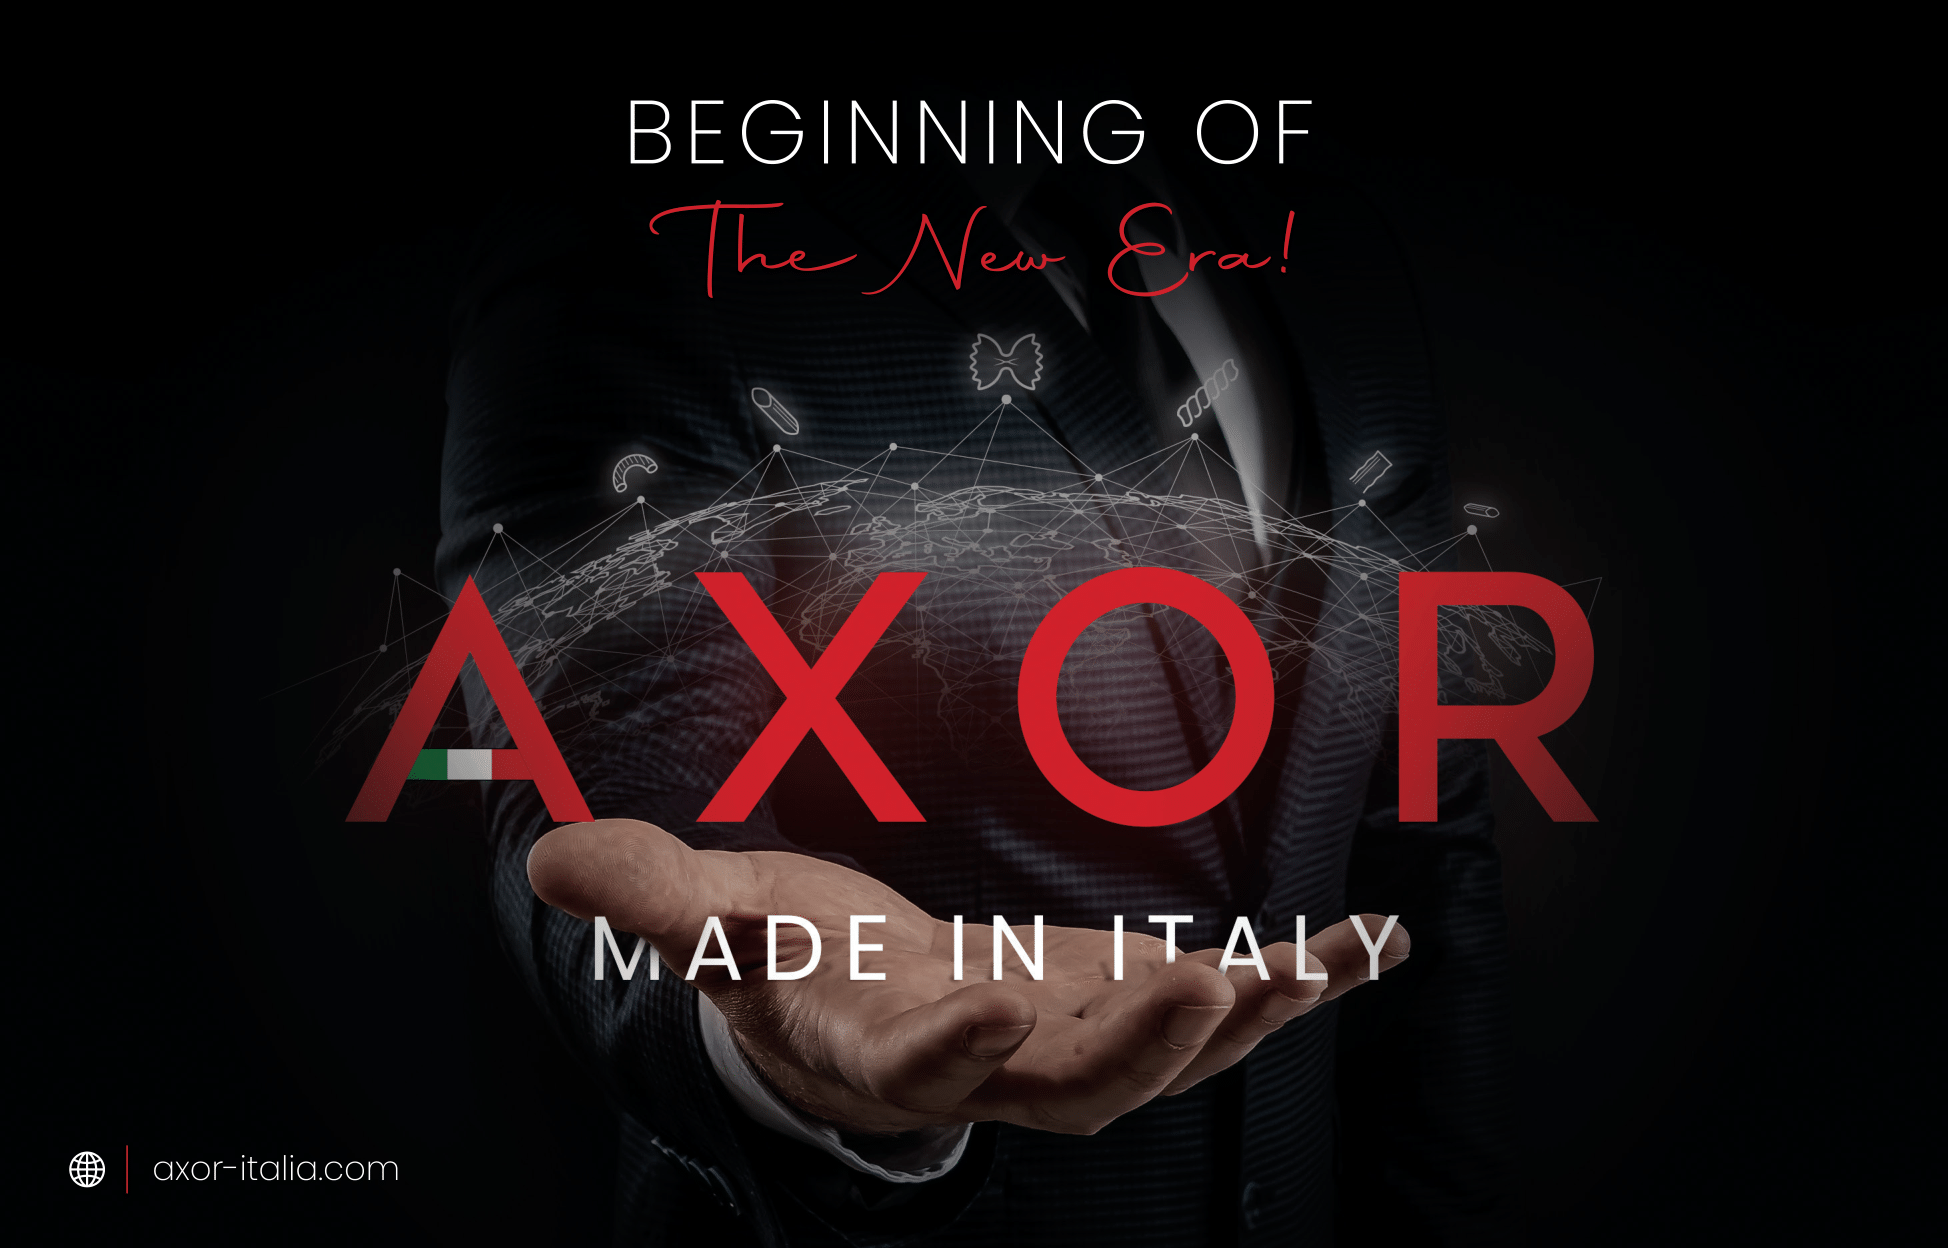 AXOR launches new logo, taking the next step for the brand